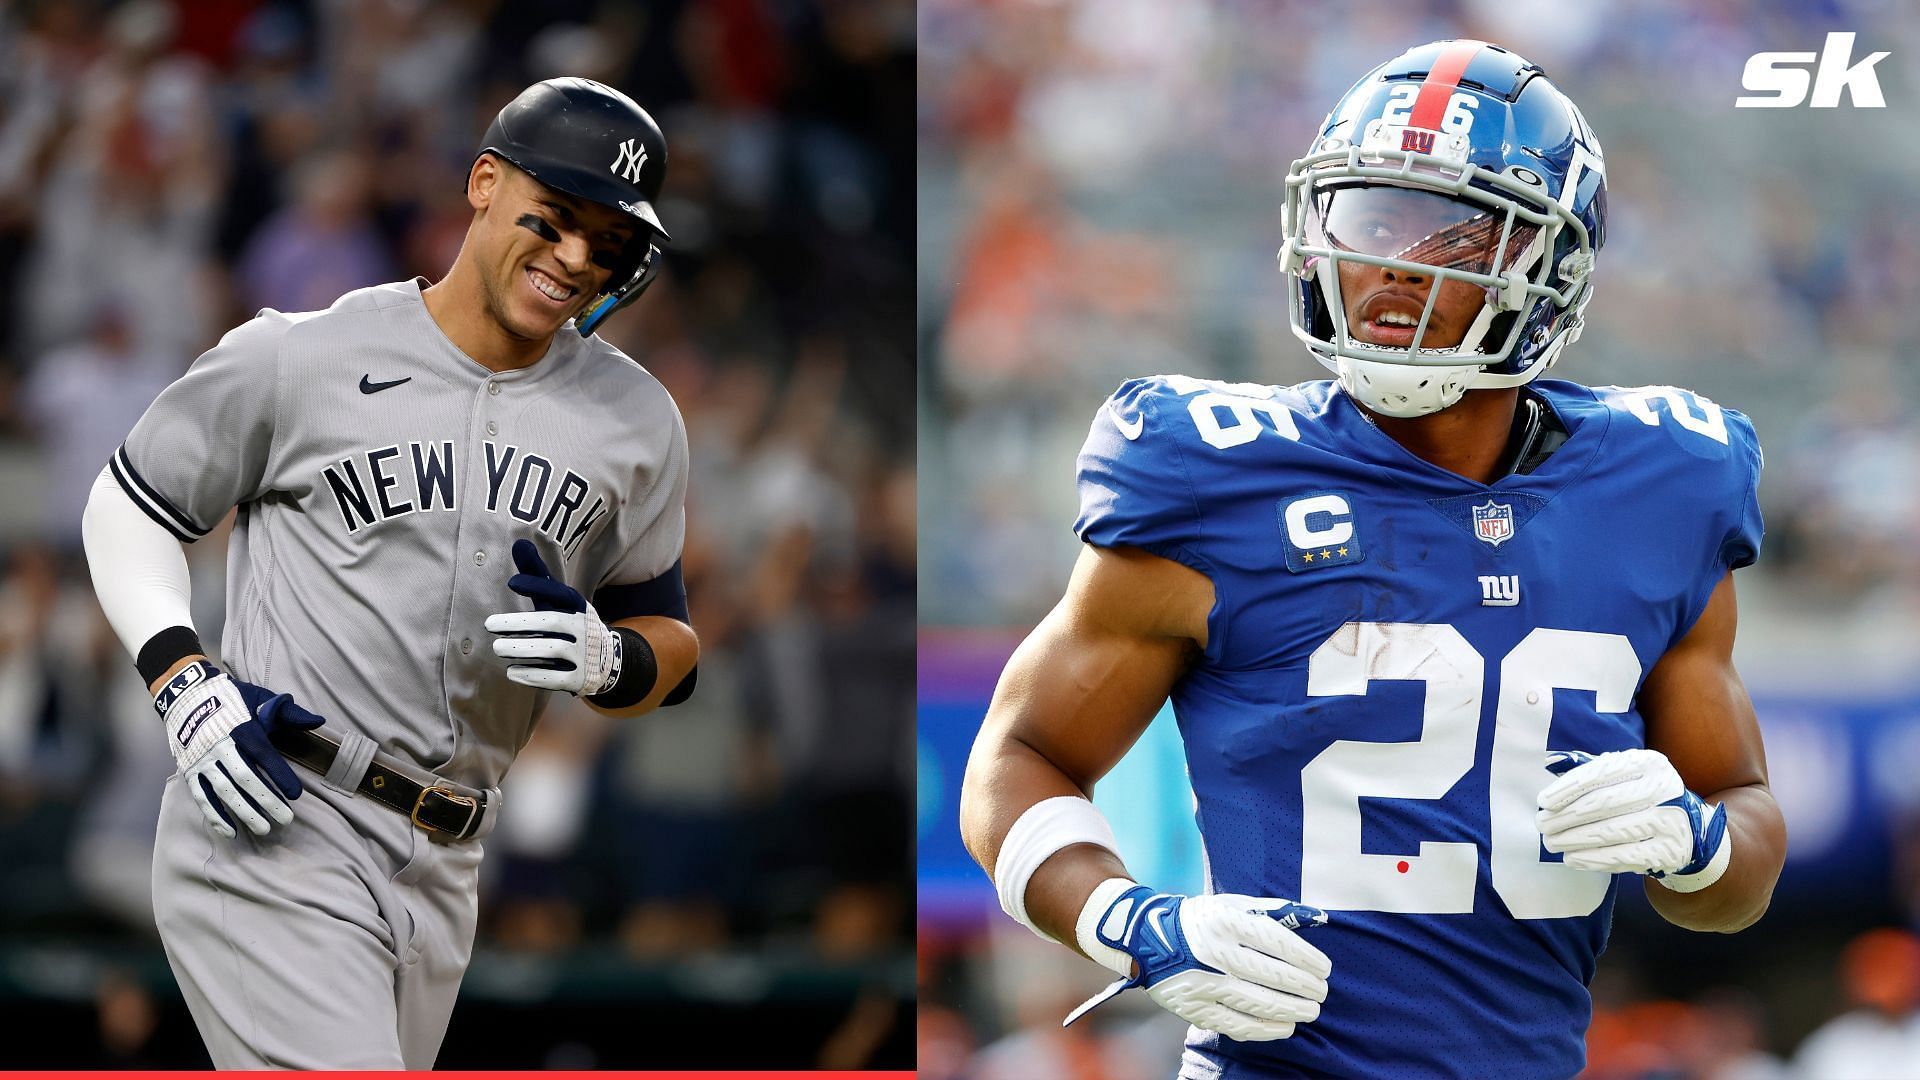 Aaron Judge recently held a meeting with NFL star Saquon Barkley